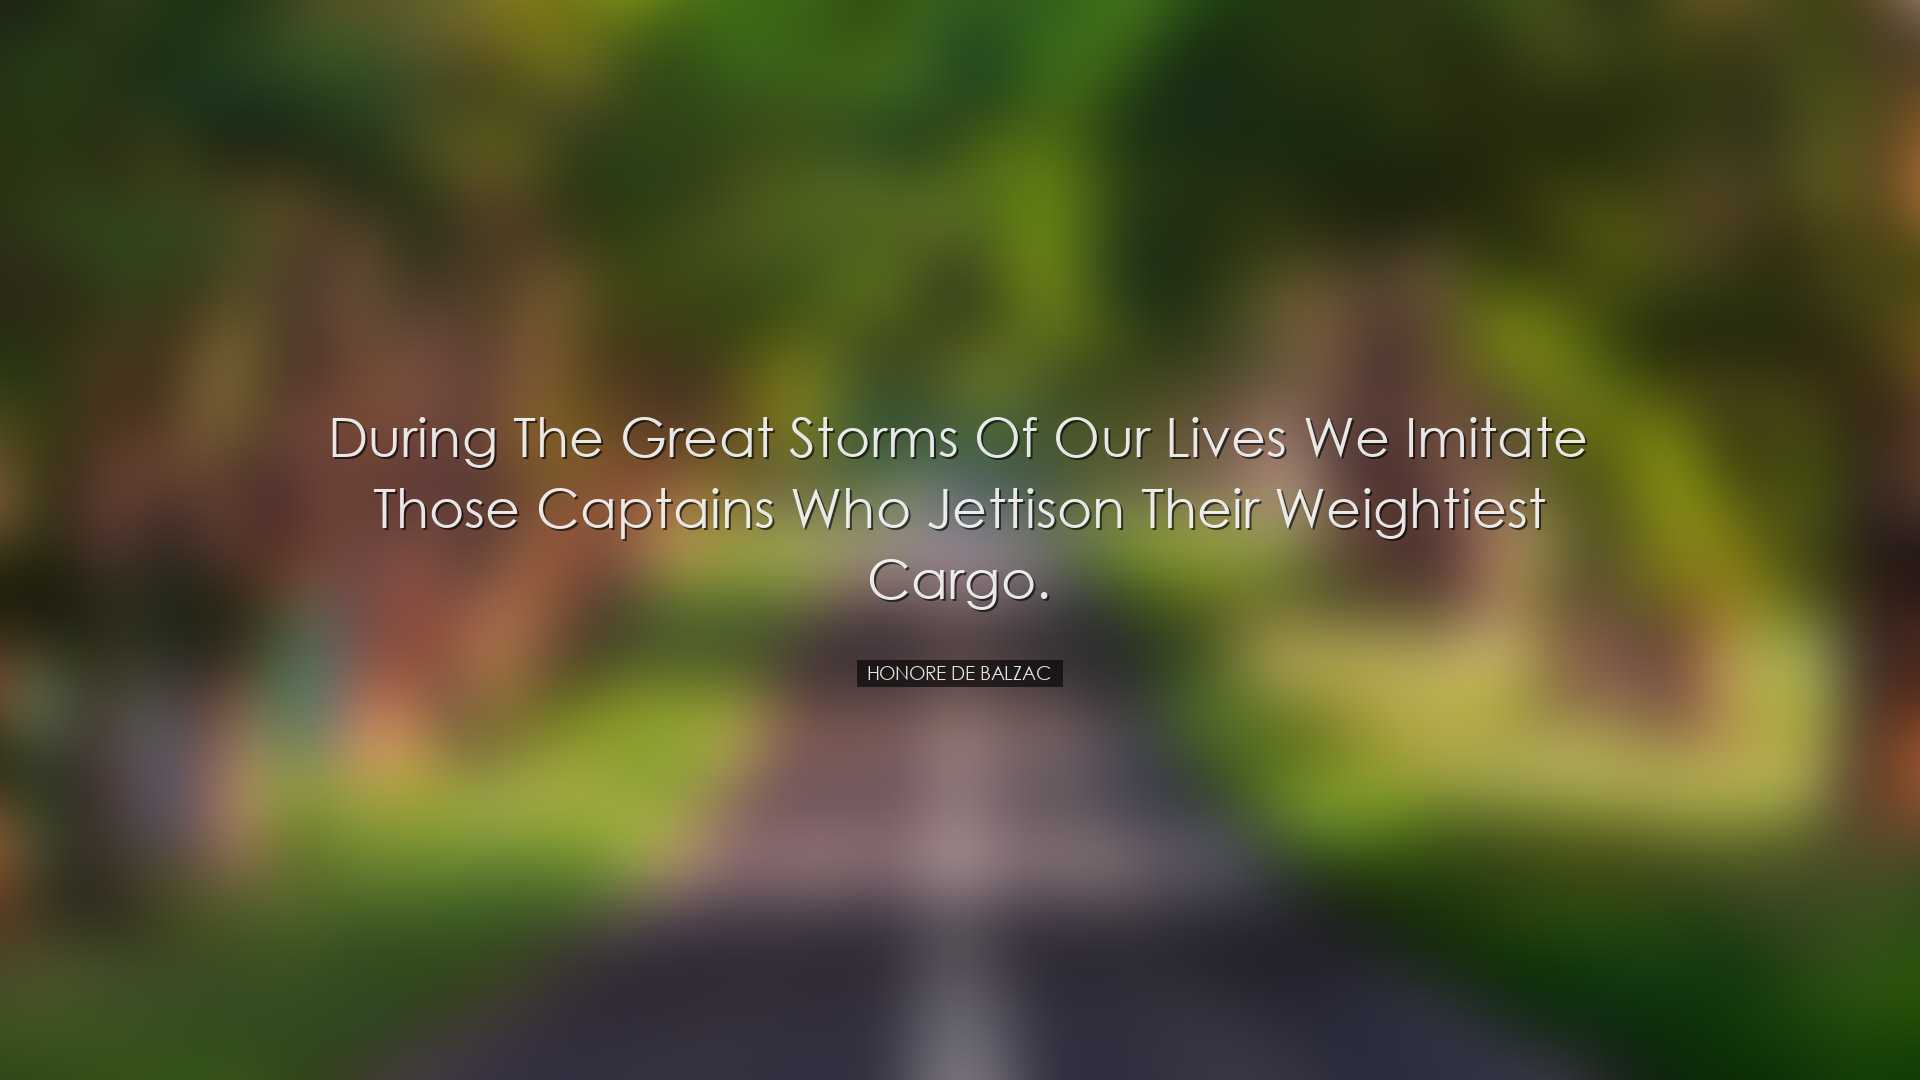 During the great storms of our lives we imitate those captains who